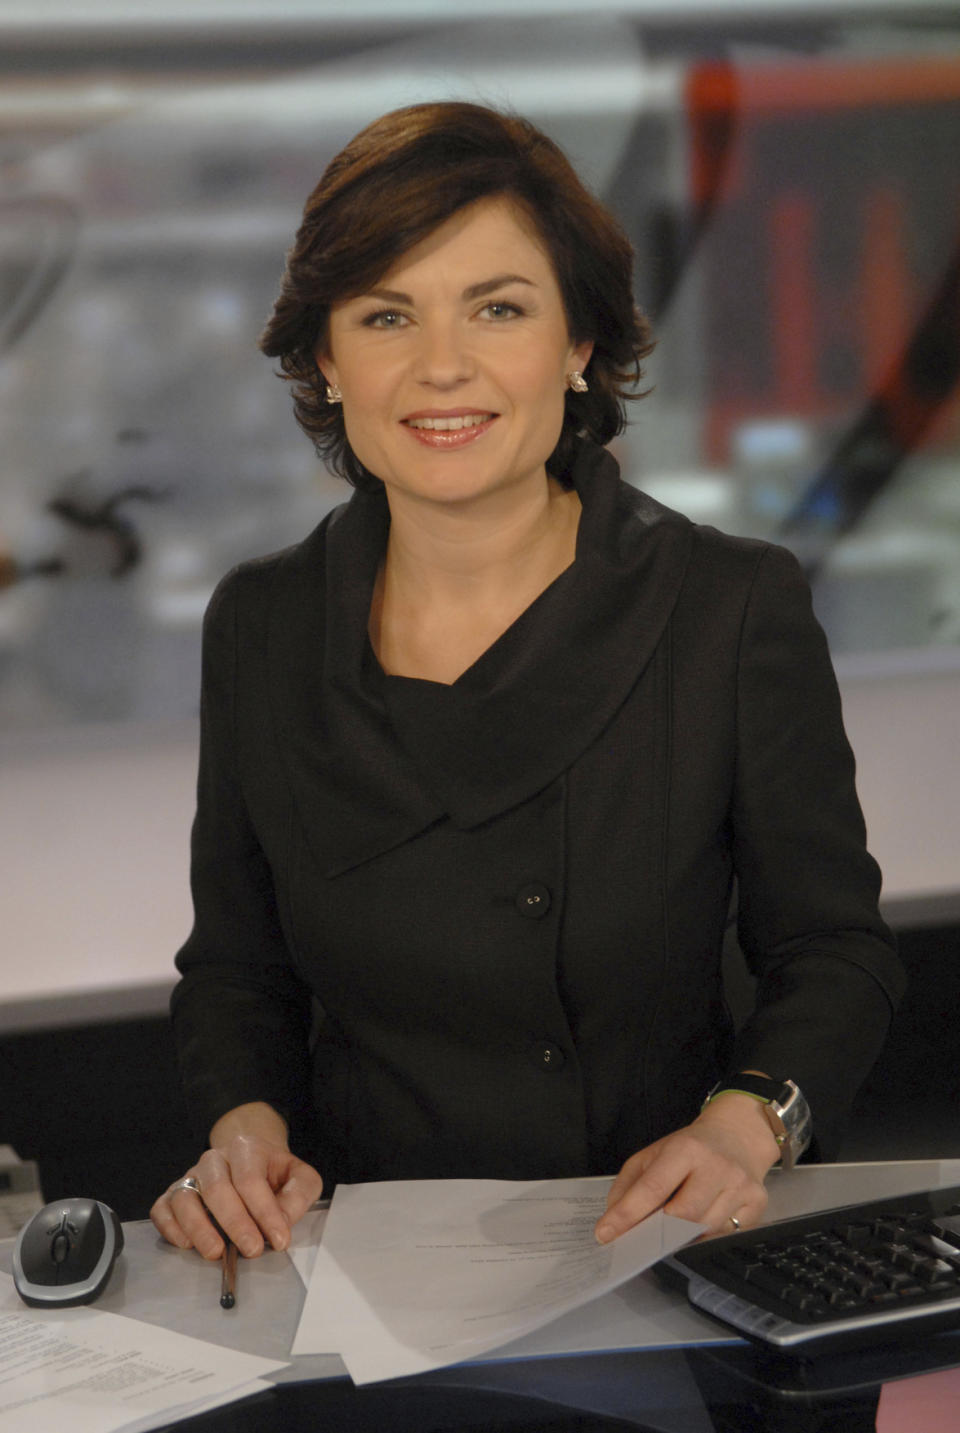 BBC News 24,01-01-2010,Jane Hill,Embargoed for publication until: n/a - Picture shows:  Jane Hill,BBC,Jeff Overs